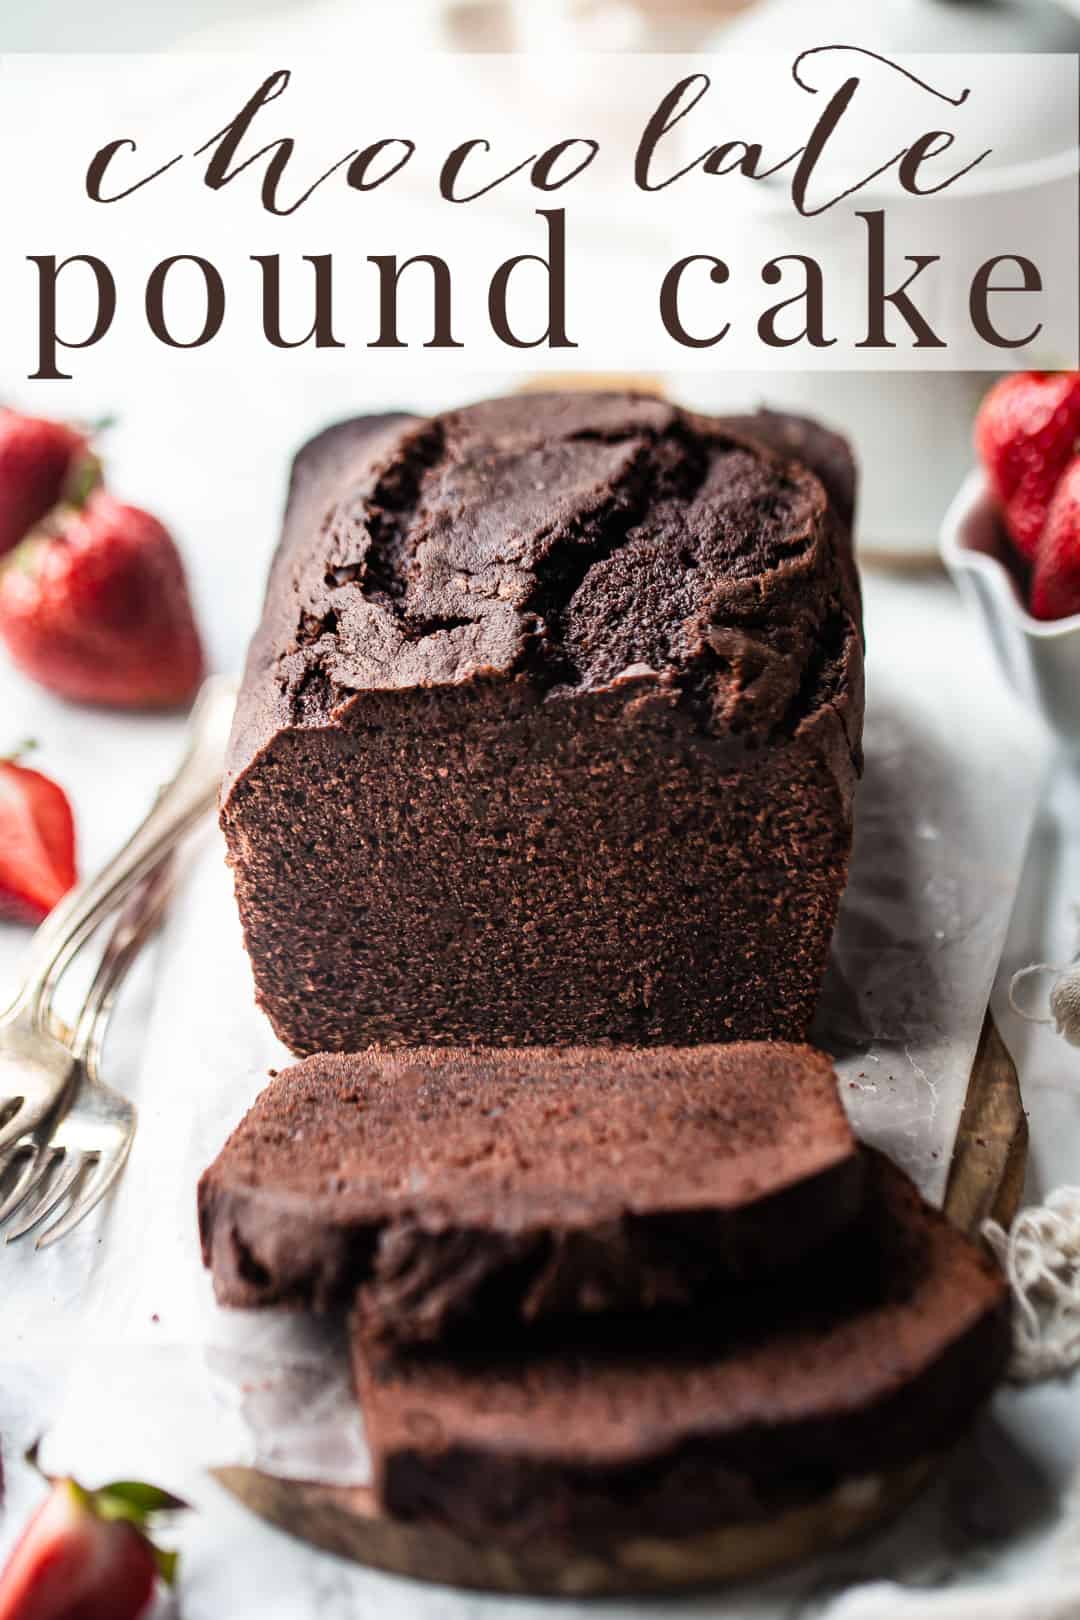 Chocolate pound cake recipe, baked in a loaf and served with fresh strawberries.